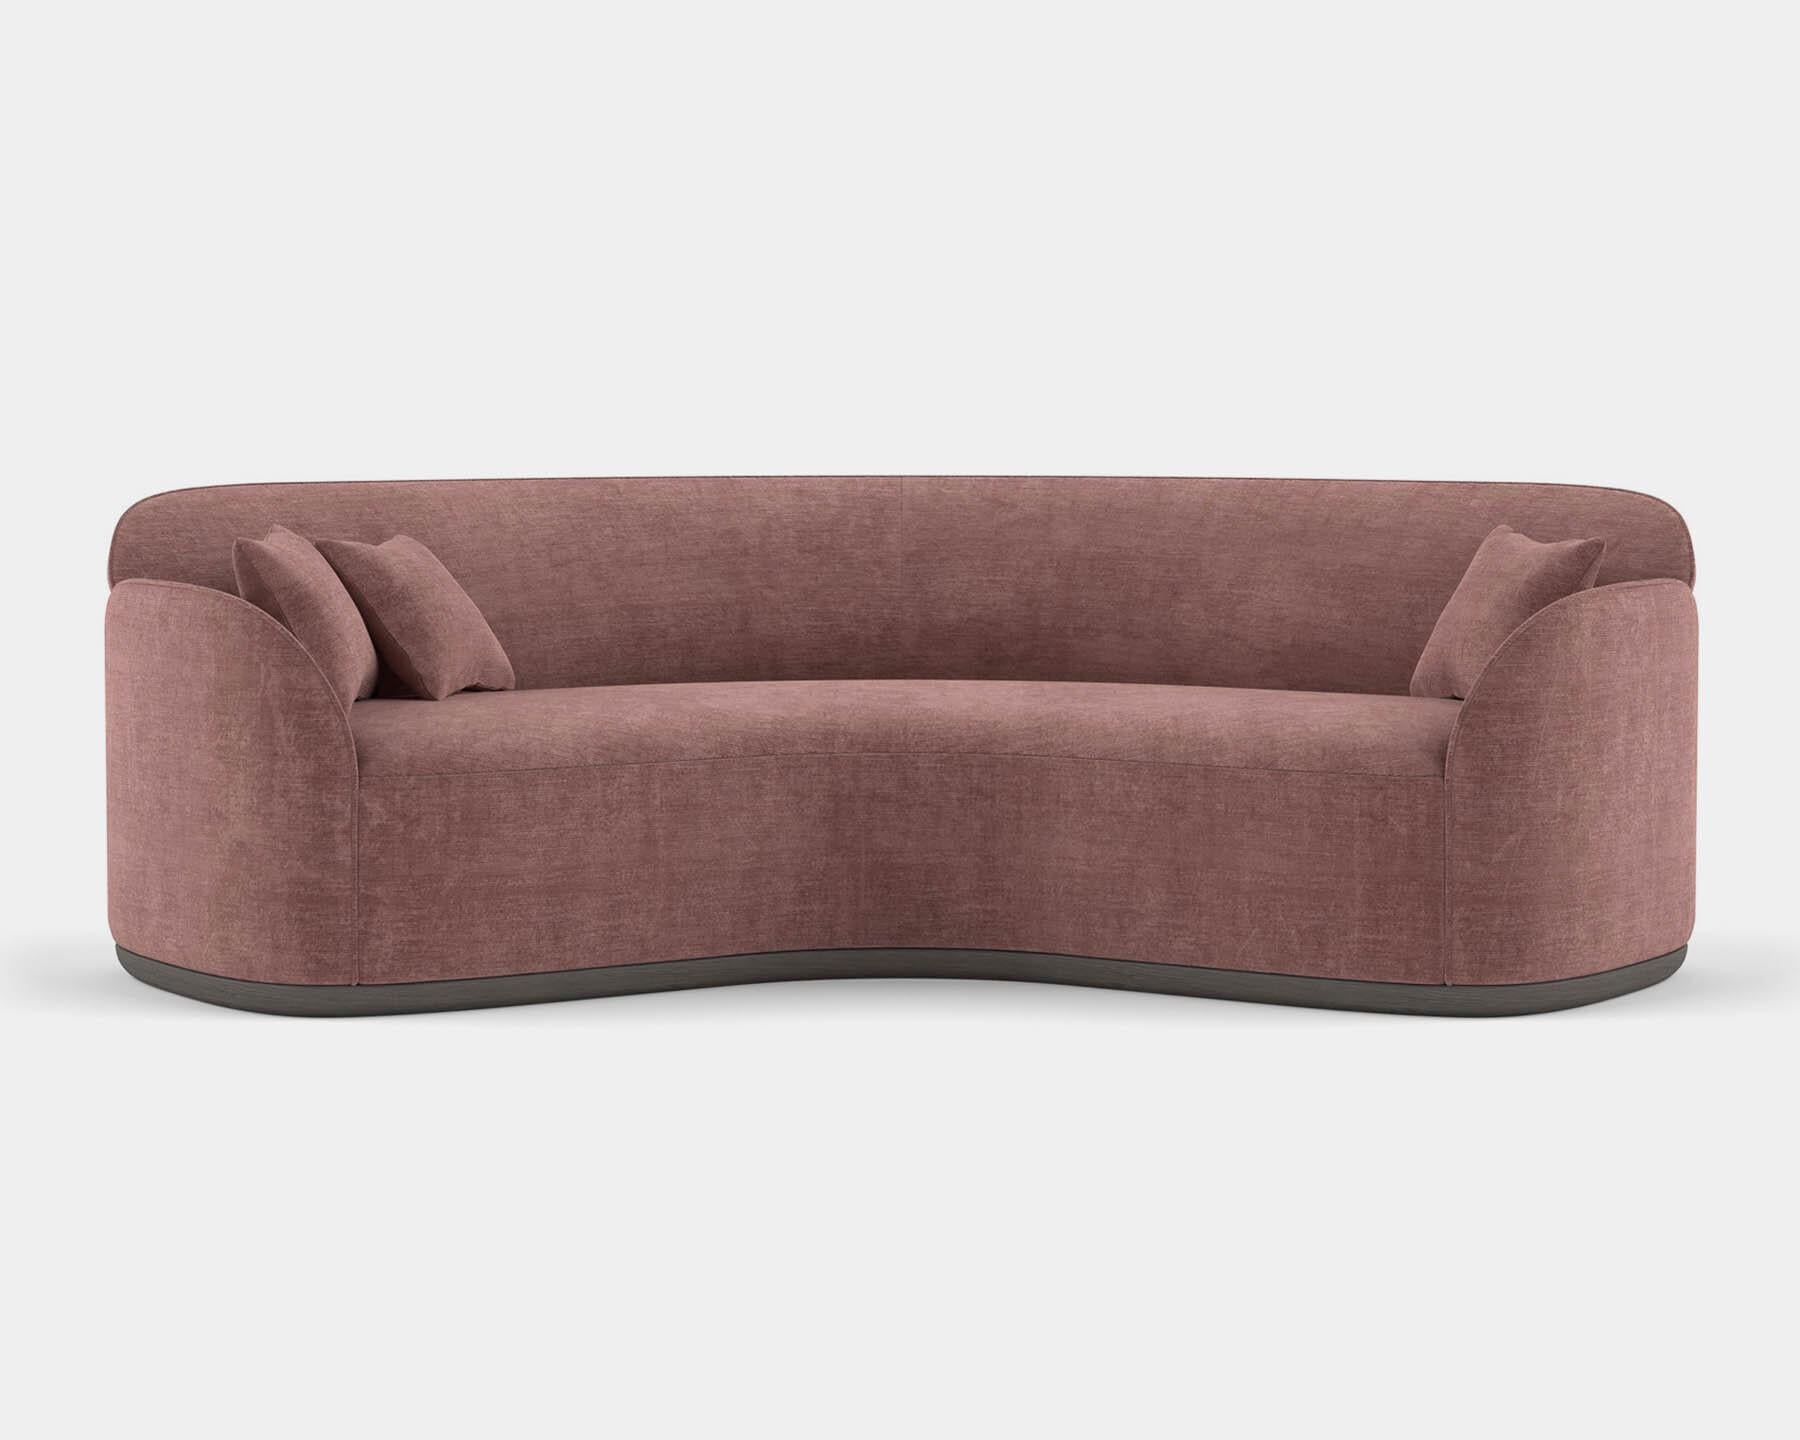 Fabric Contemporary Curved Sofa 'Unio' by Poiat, Hanoi 04 by Pierre Frey For Sale